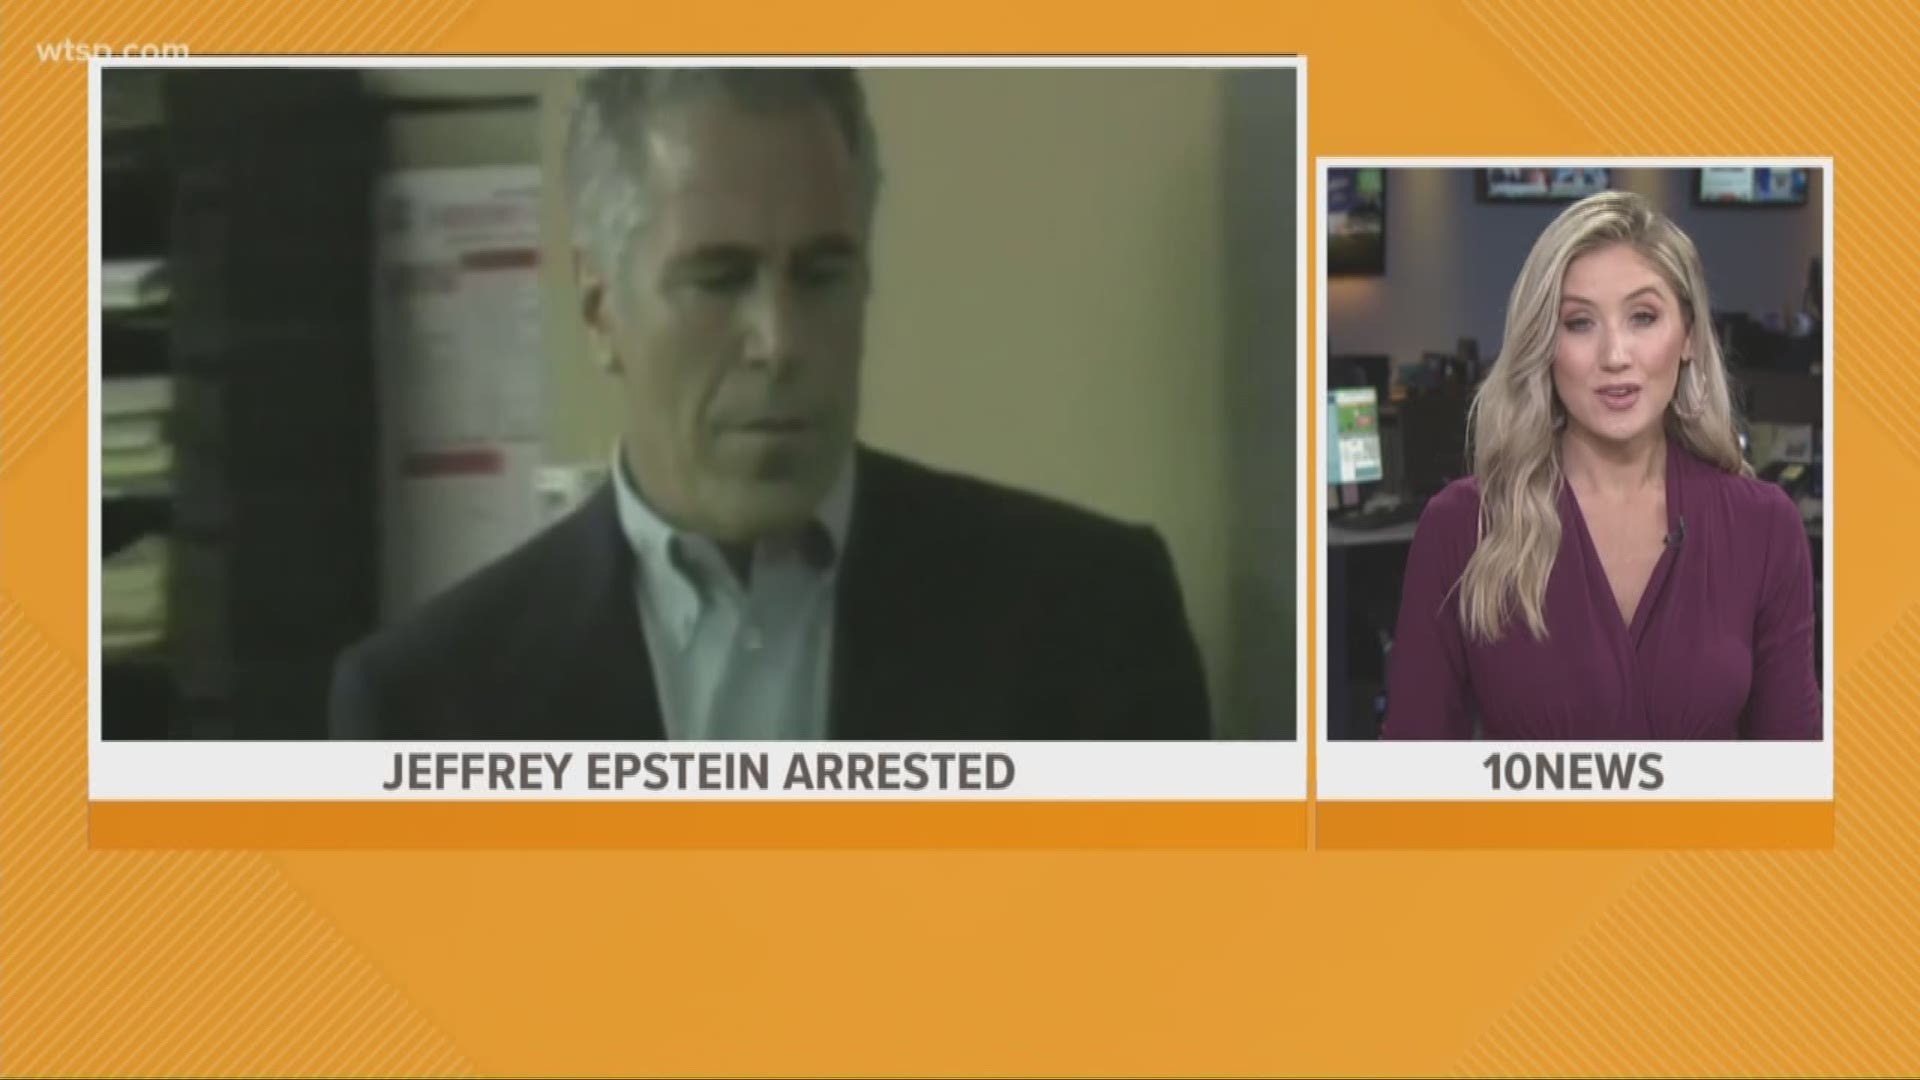 Wealthy financier and registered sex offender Jeffrey Epstein is due in court following an arrest in New York on new sex-trafficking charges involving allegations that date to the early 2000s, according to law enforcement officials. https://on.wtsp.com/2NCsYYJ